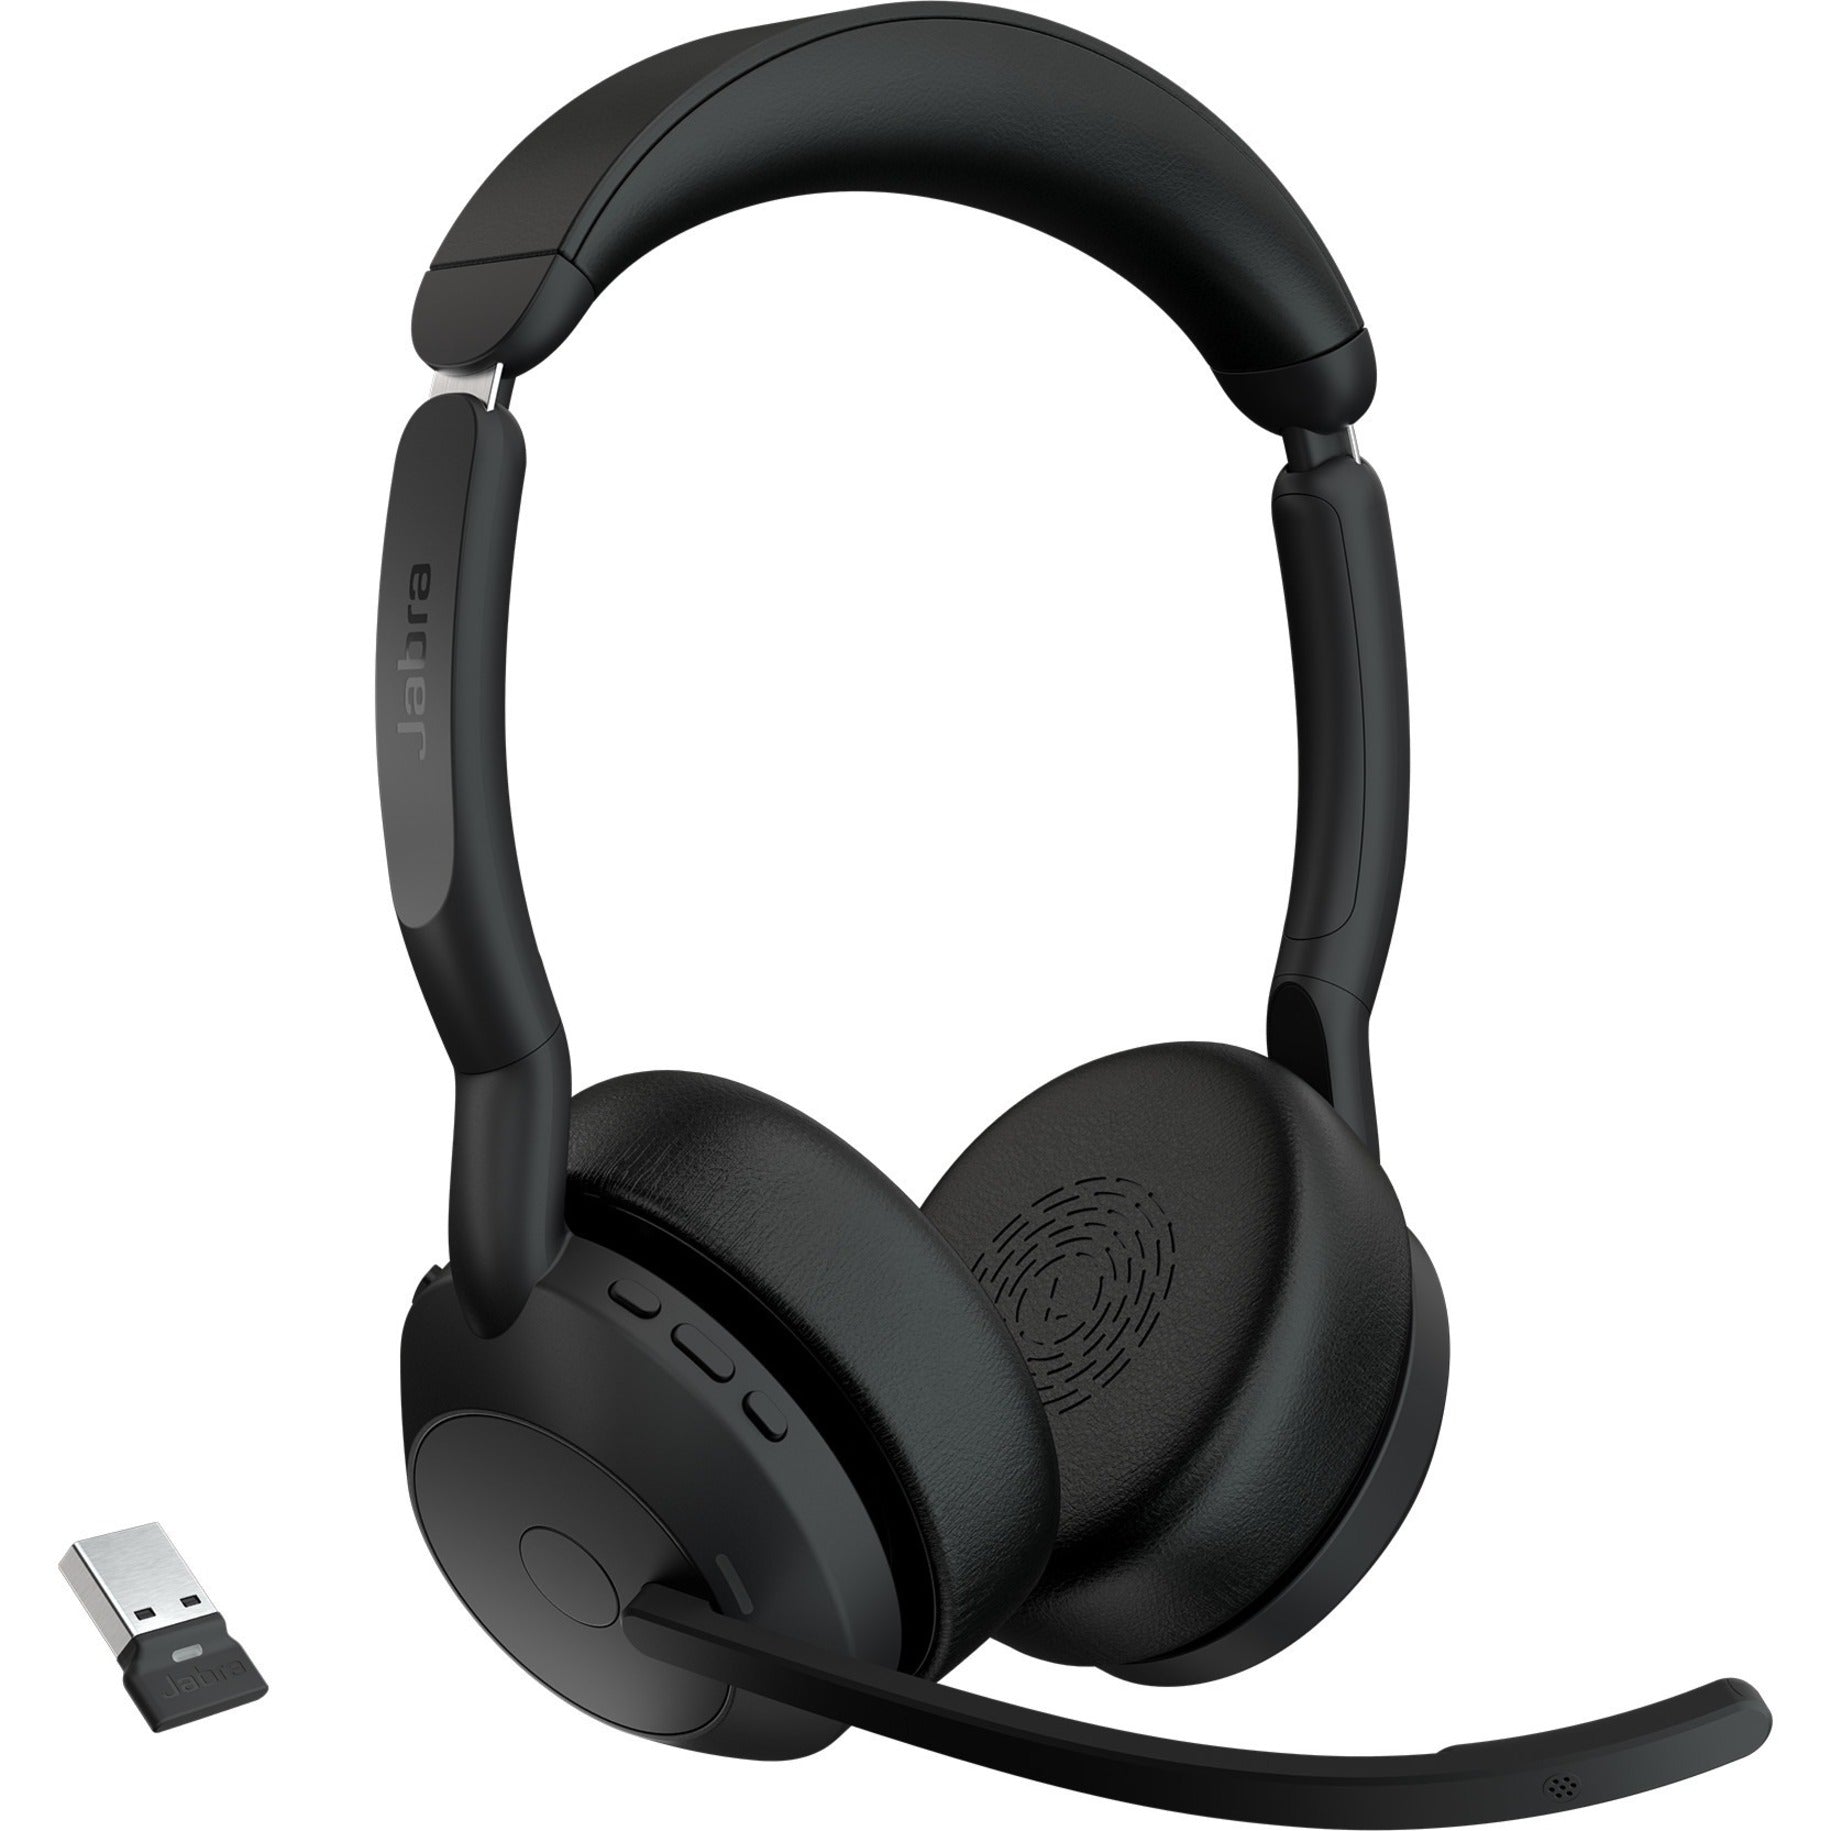 Jabra 25599-999-999-01 Evolve2 55 Headset, Wireless Bluetooth Stereo Headphones with Noise Cancelling, 2 Year Warranty